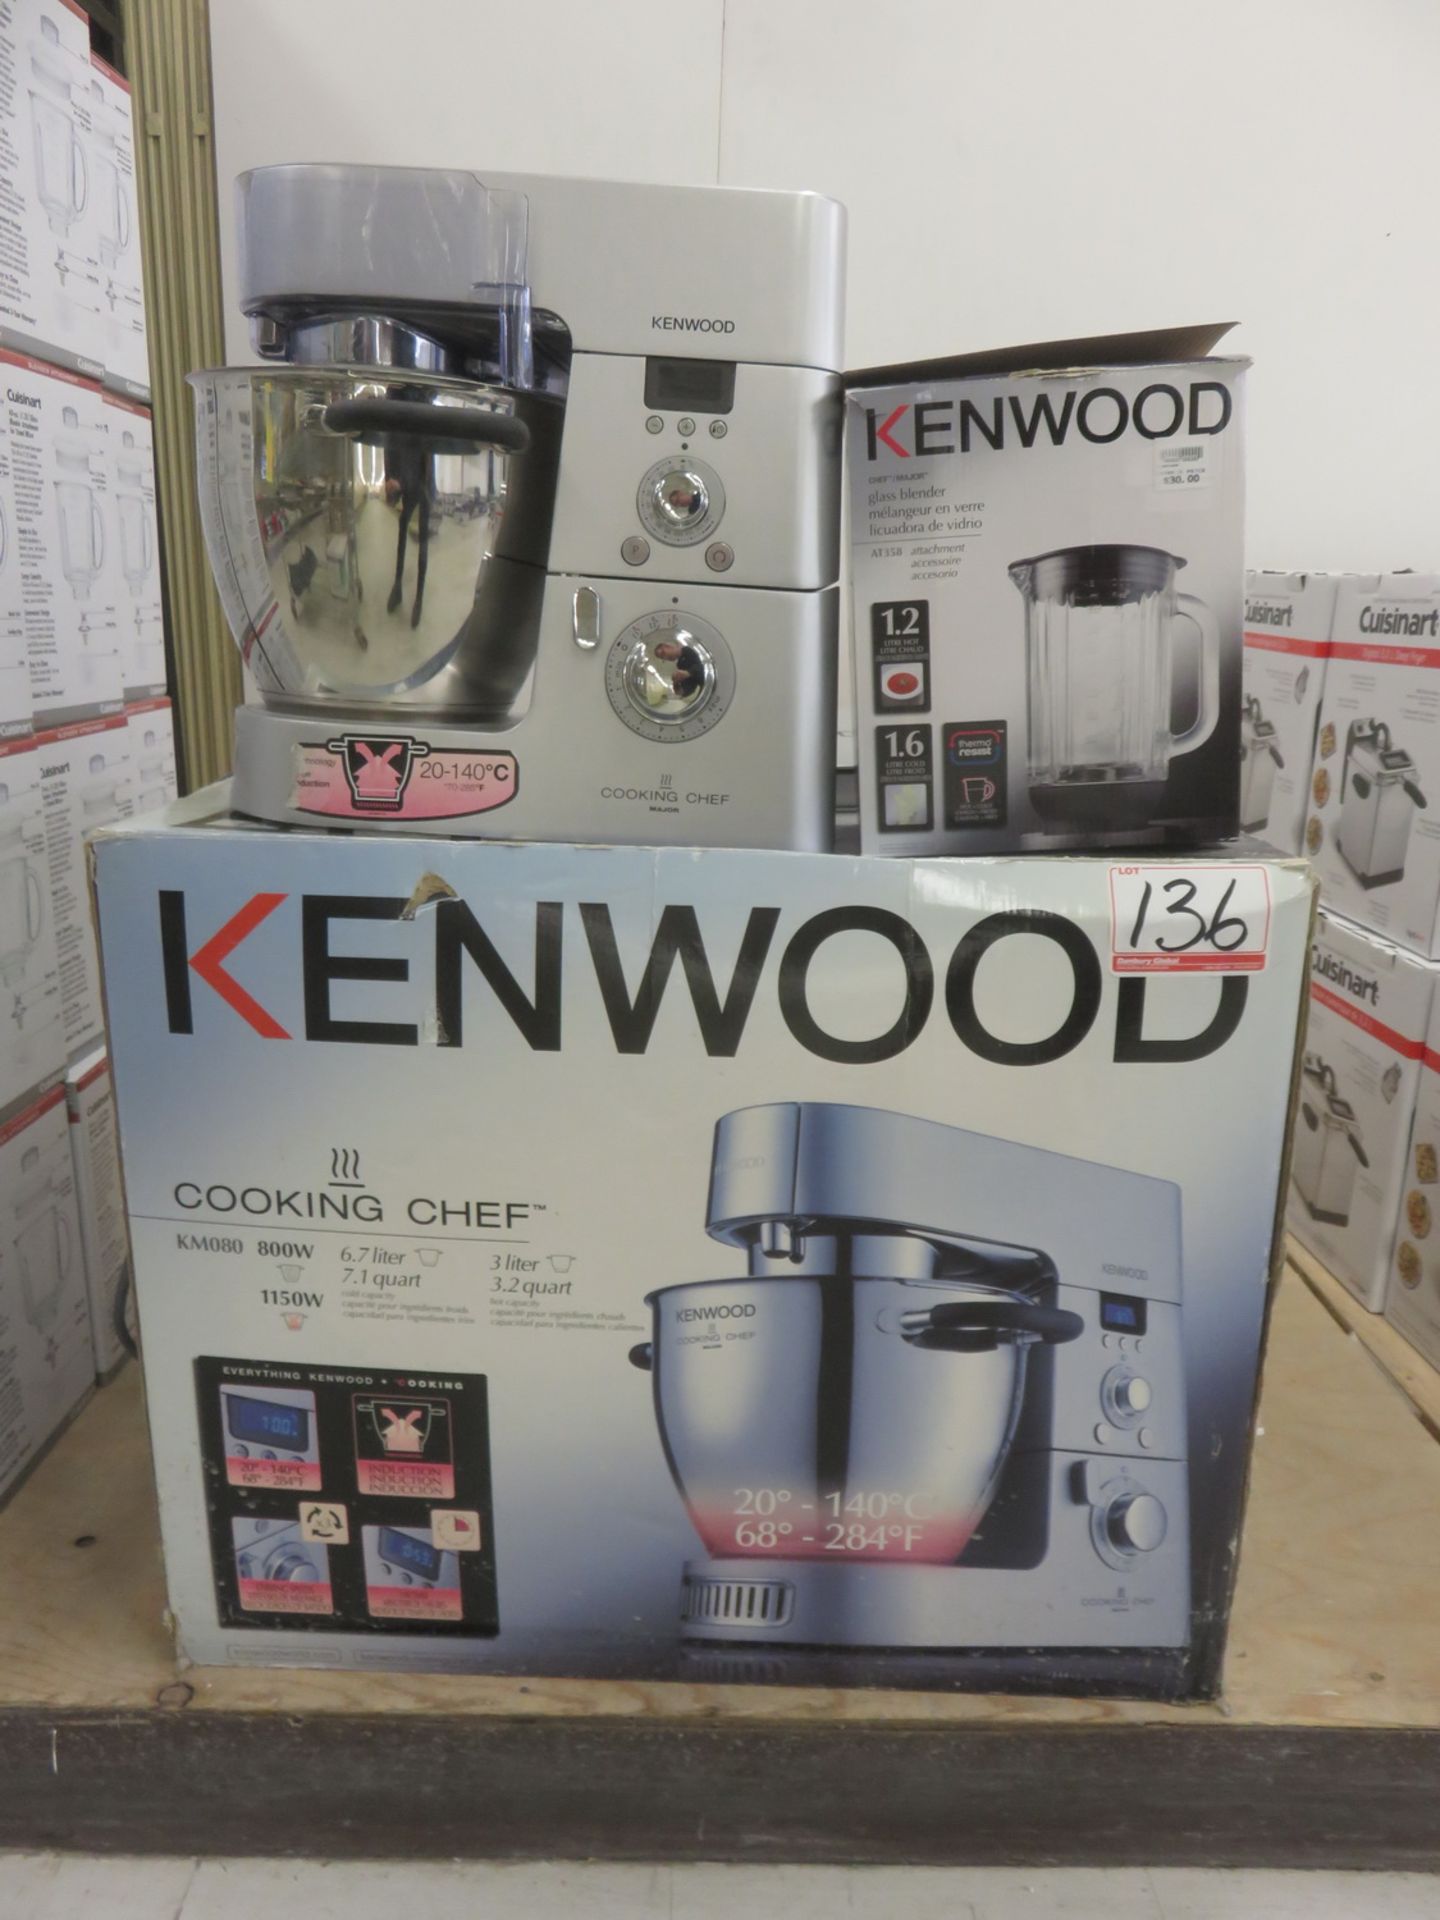 KENWOOD KM080 800W 6.7L COOKING CHEF